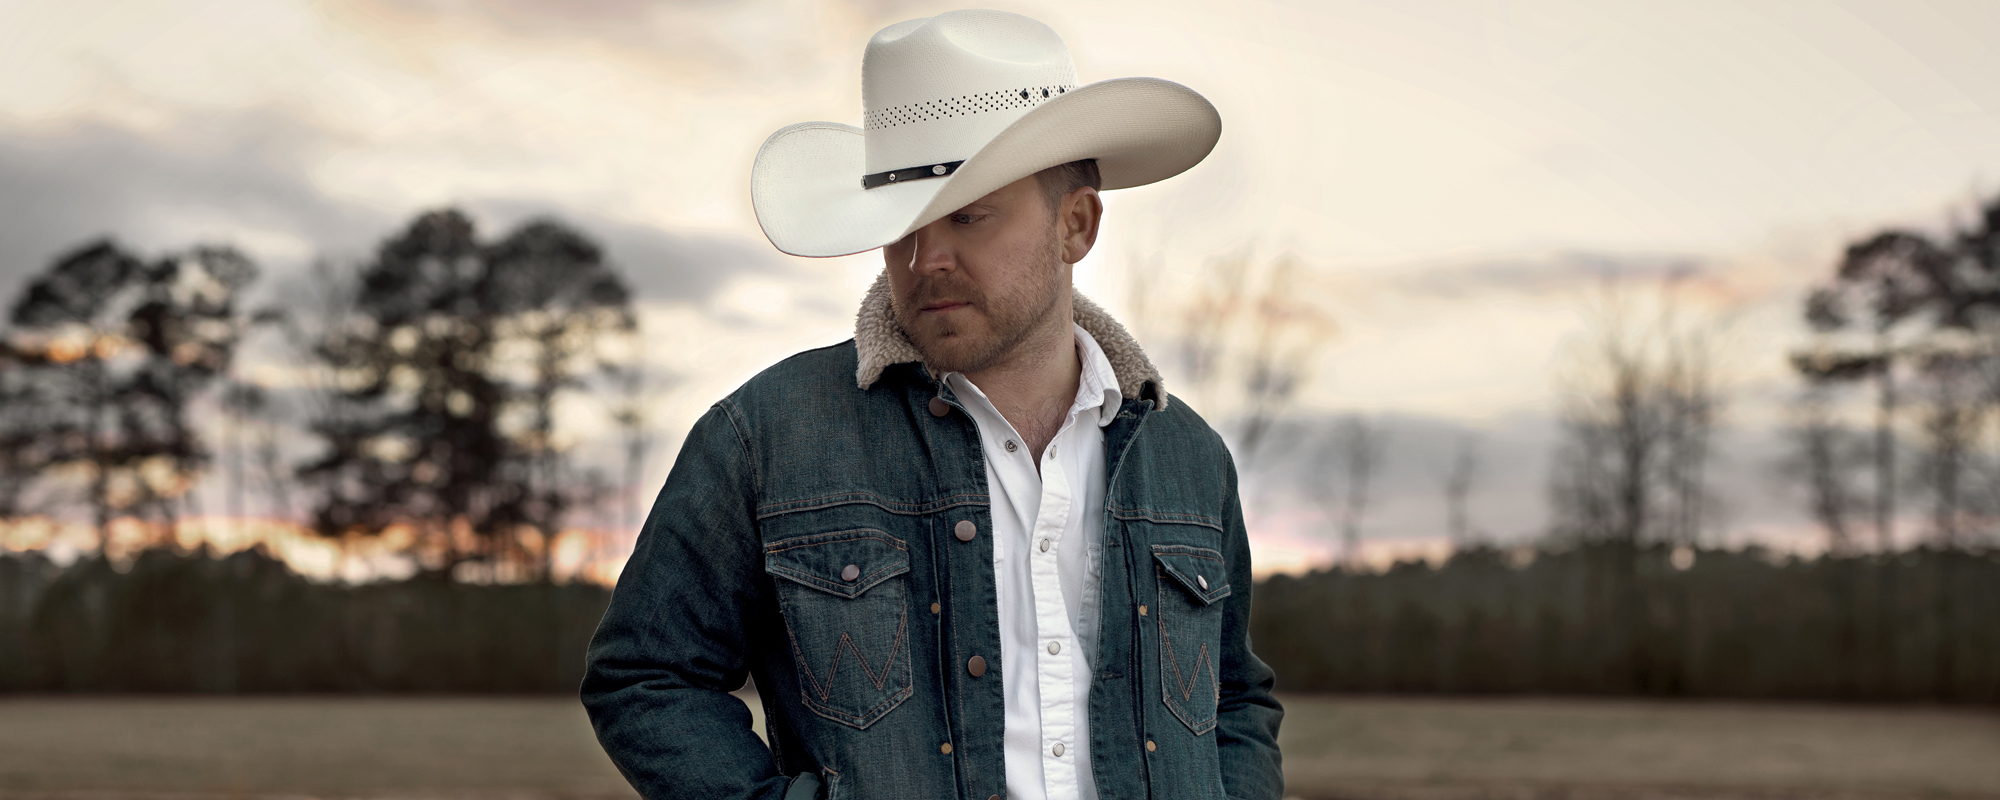 Justin Moore Opens Up About Staying in His Country Music Lane: “We’re Never Going to Go Off the Rails”